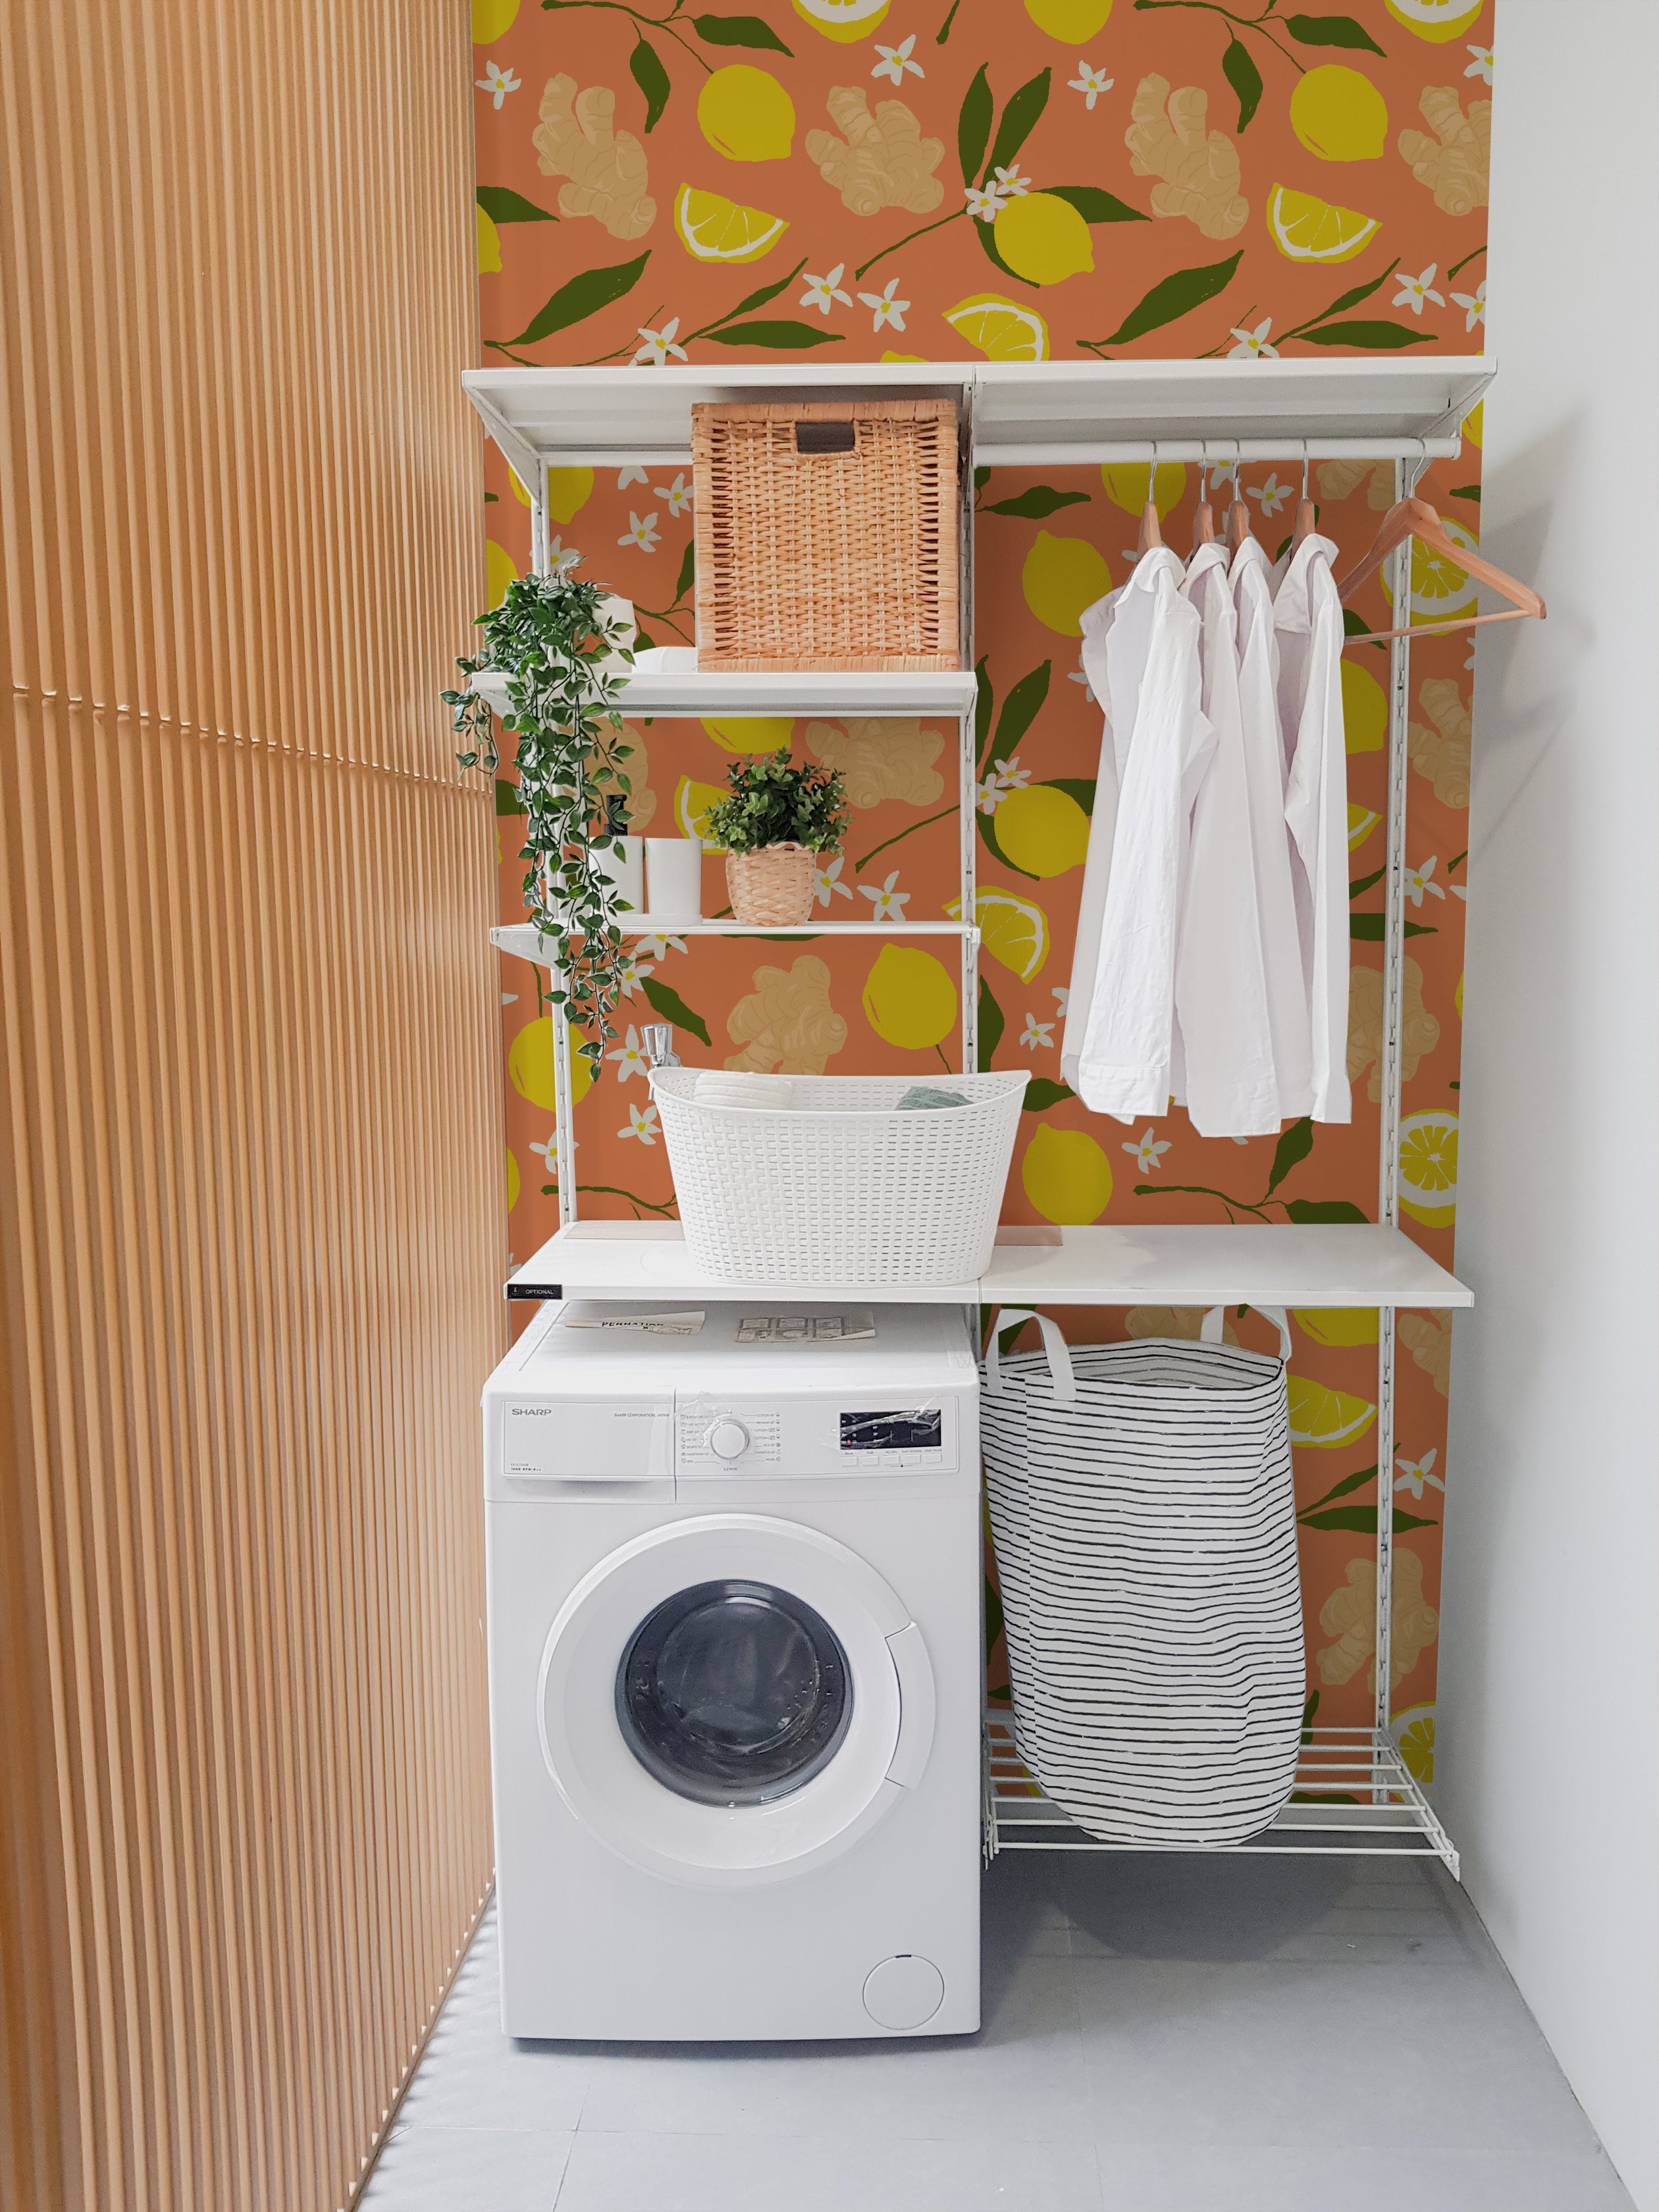 A cozy corner of a laundry room enhanced by the Lemon Ginger Wallpaper. This bright pattern consists of yellow lemons, ginger flowers, and small white blossoms on an orange background. The room features a washing machine, white shelving with wicker baskets, and neatly hung white bathrobes, adding a touch of warmth and organization.